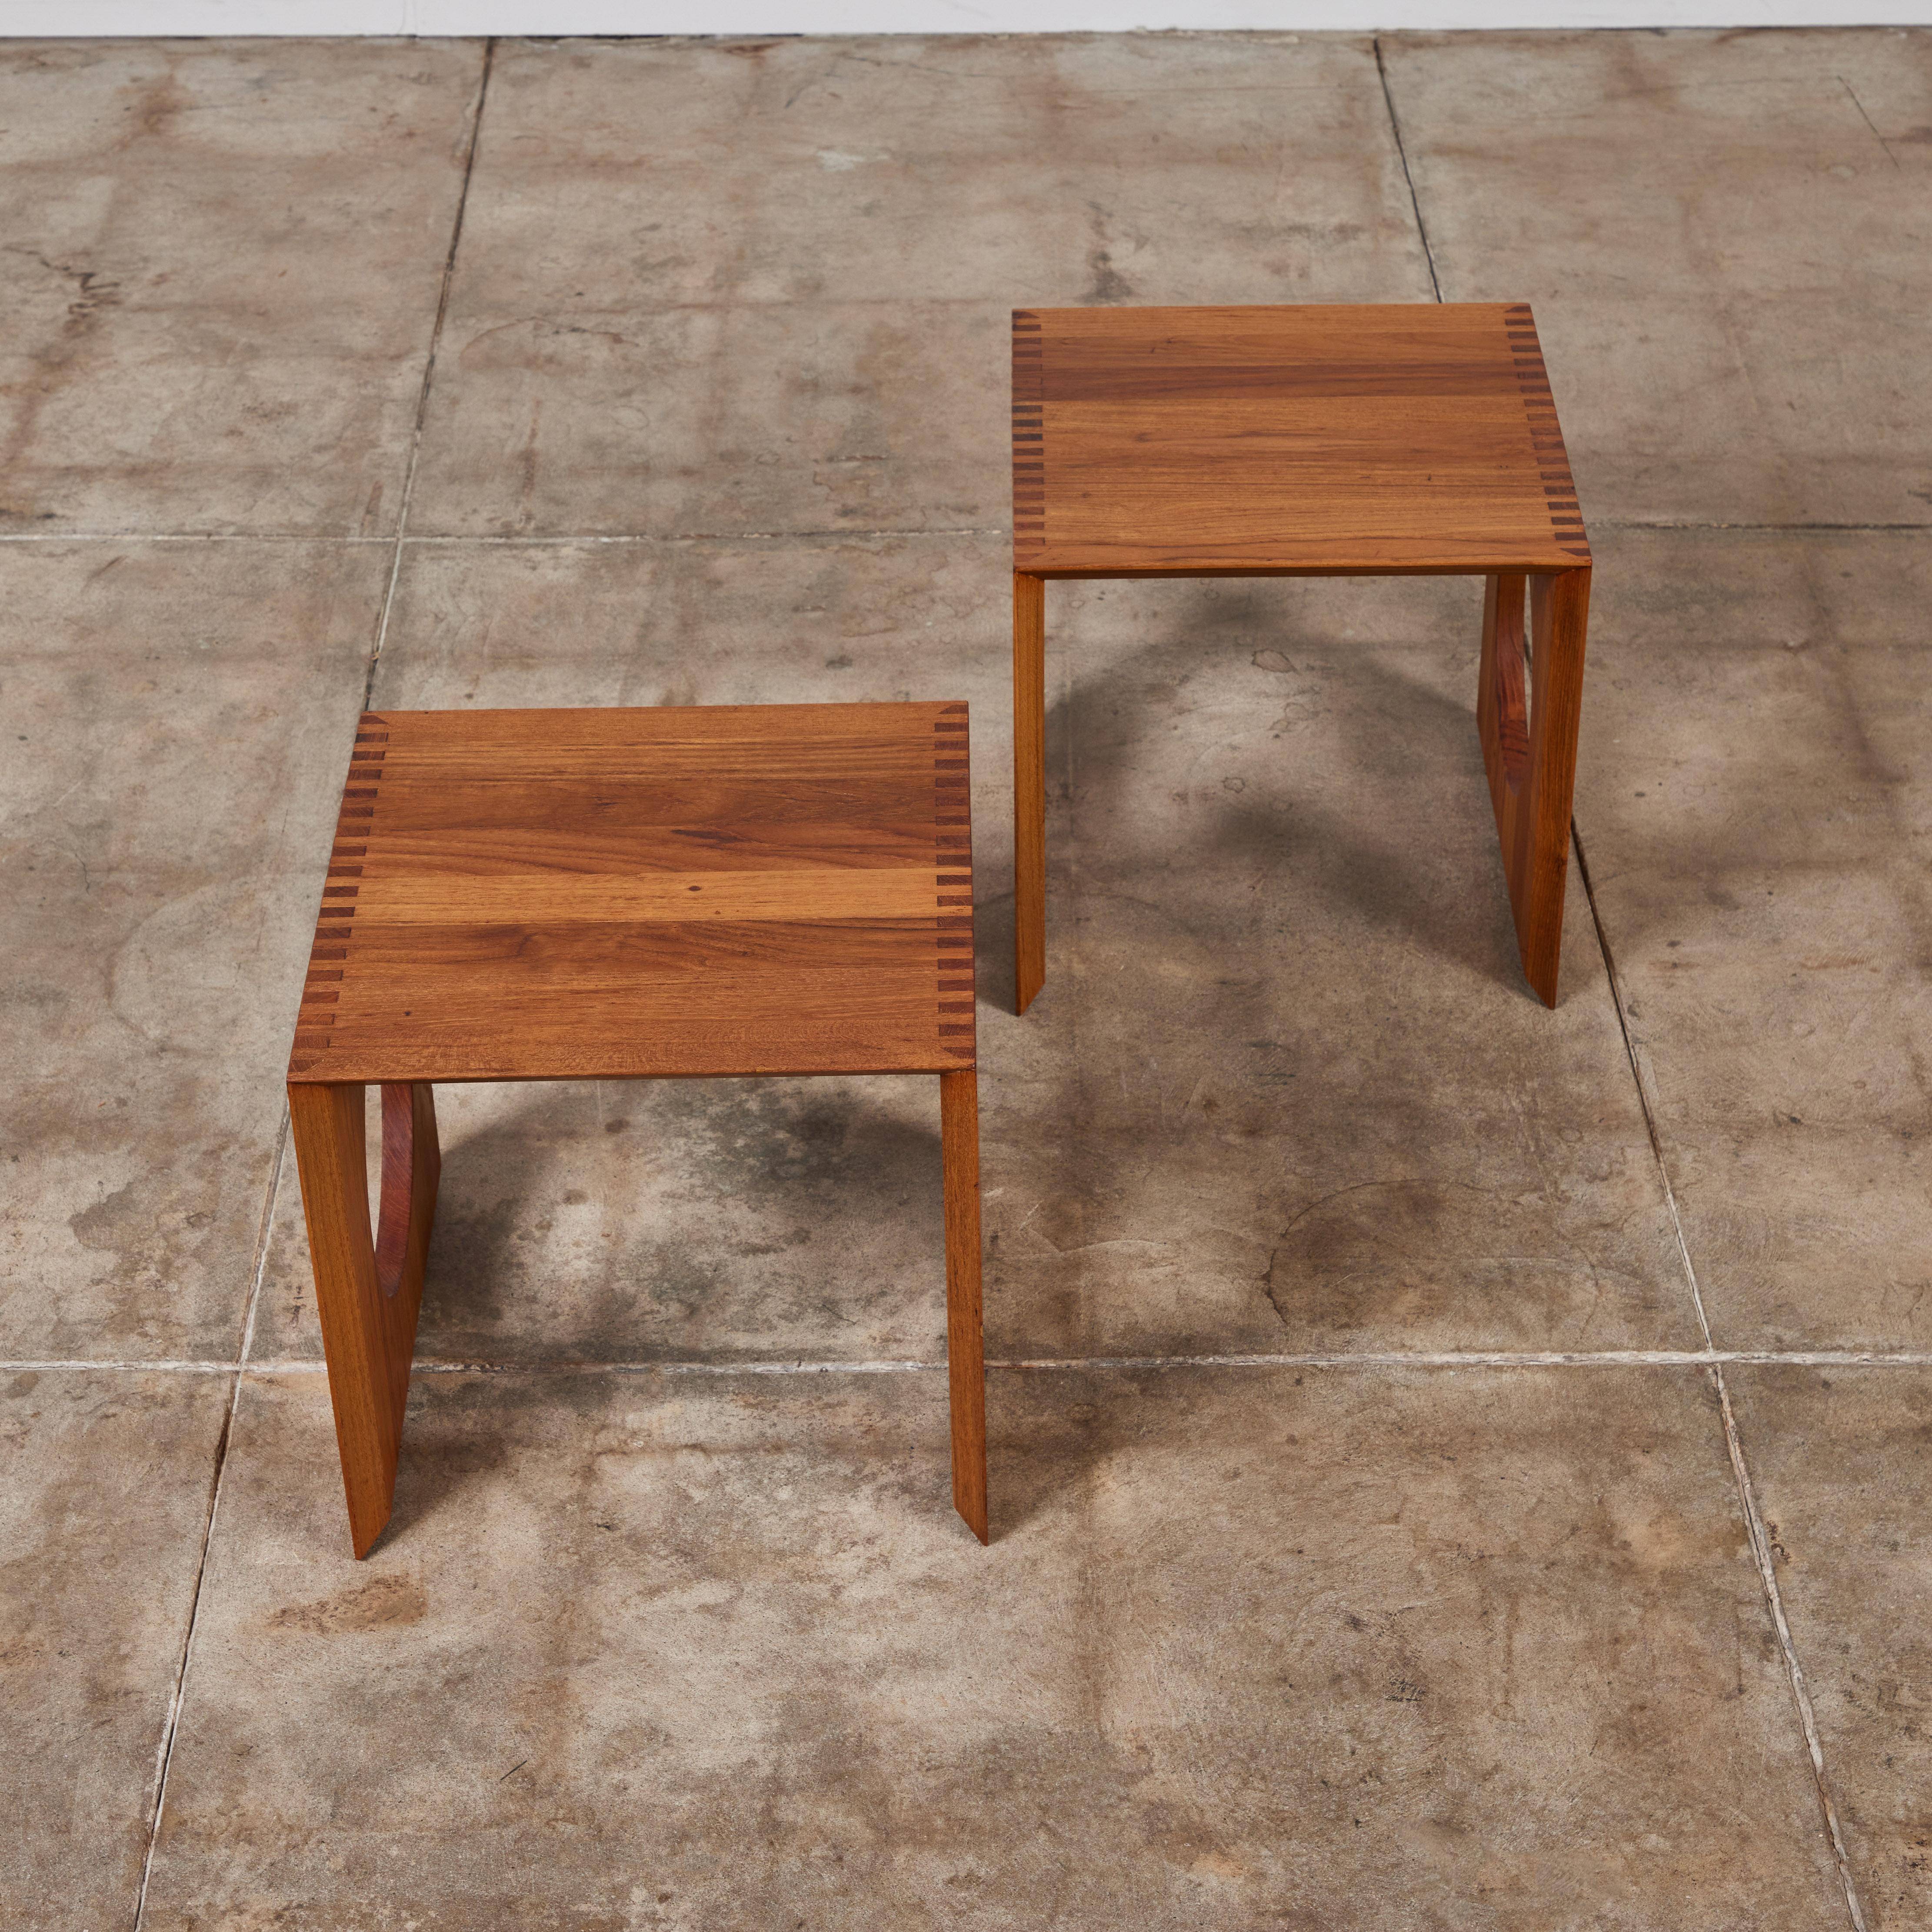 Pair of Jens H. Quistgaard Interlocking Cube Side Tables For Sale 2